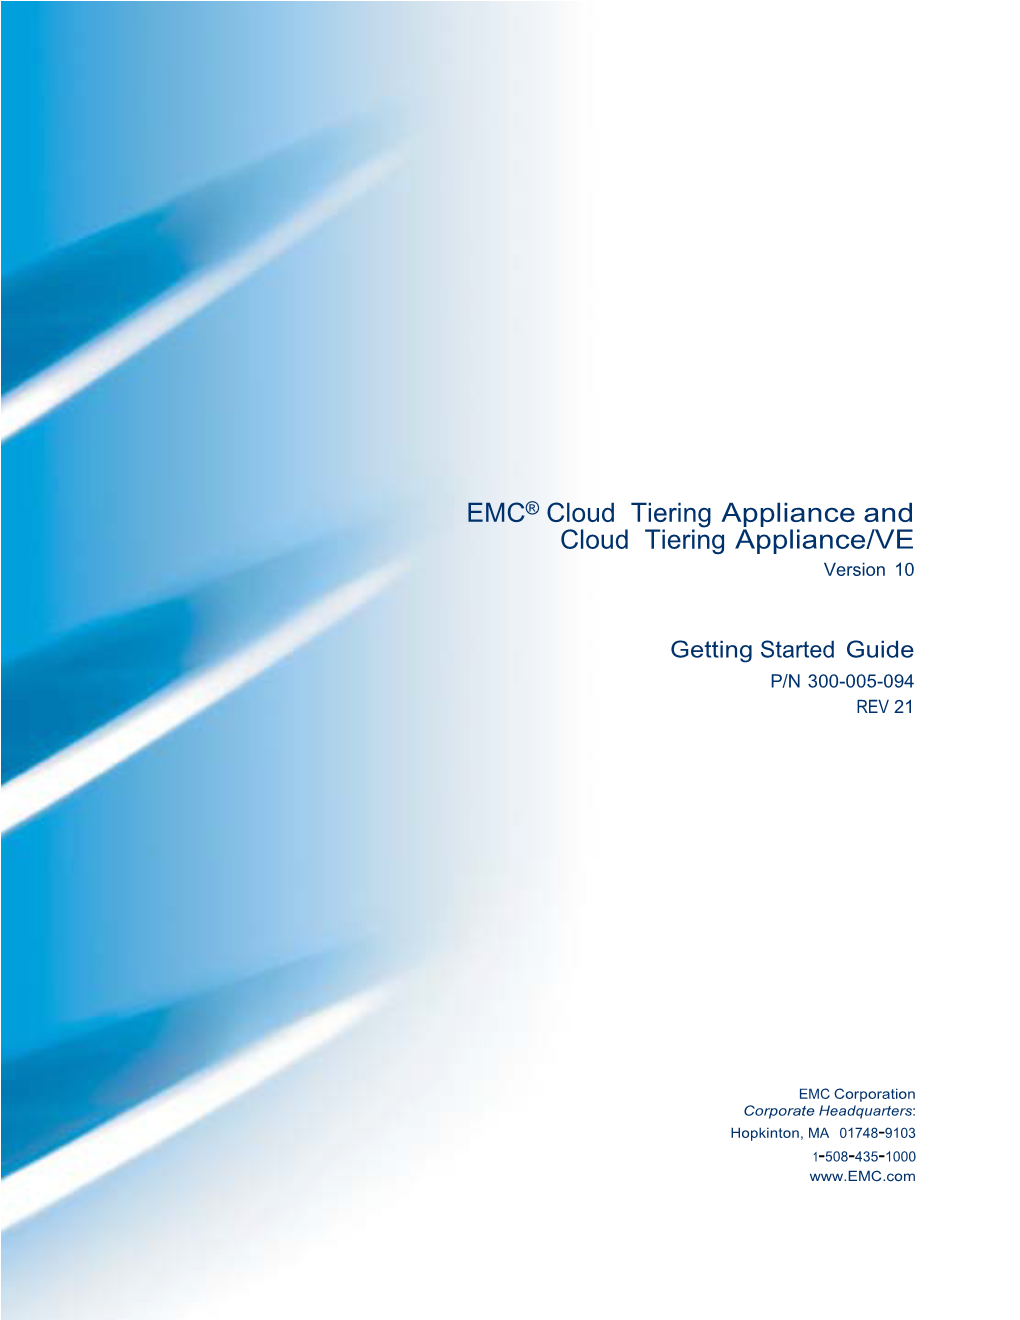 EMC Cloud Tiering Appliance and EMC Cloud Tiering Appliance/VE Getting Started Guide